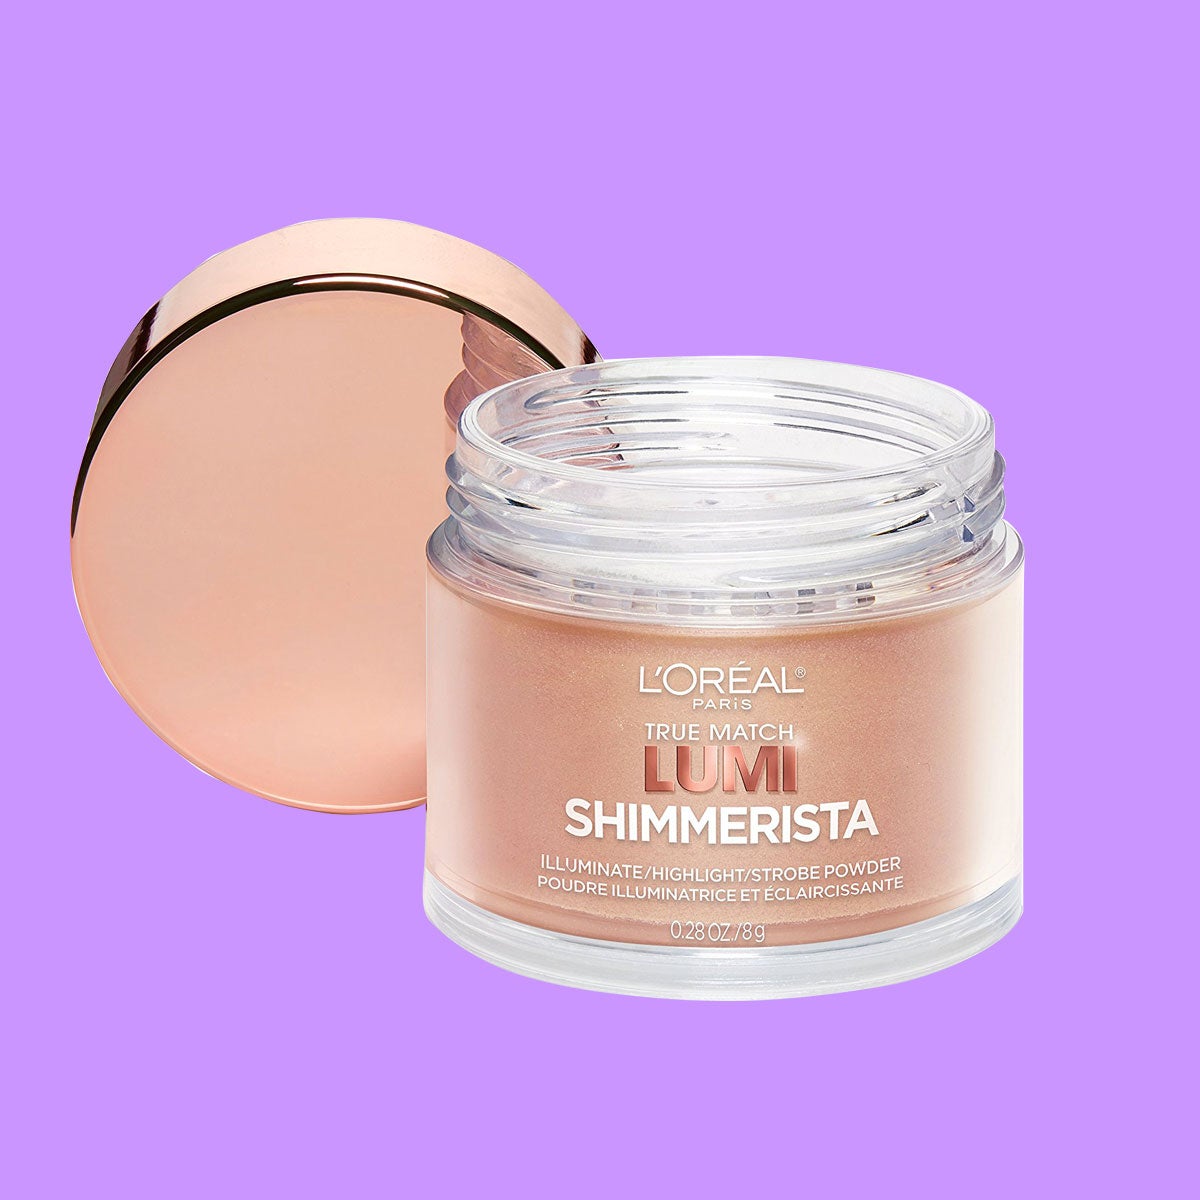 Gotta Have It: The Glowy Beauty Products Your Makeup Bag Needs Stat